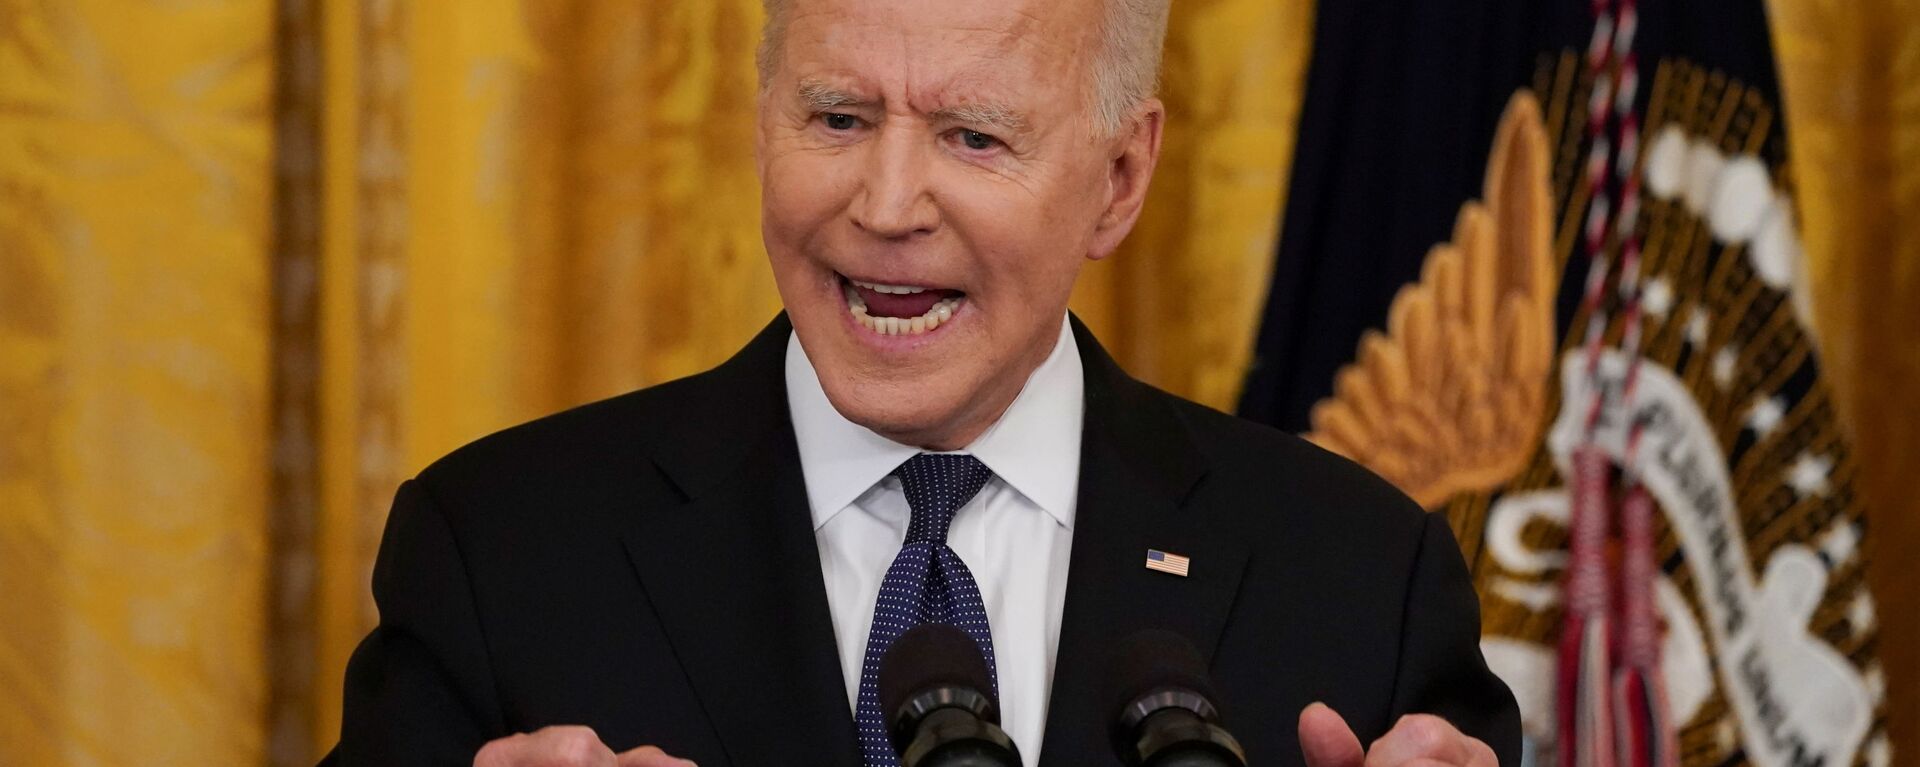 U.S. President Joe Biden gestures as he speaks before signing the COVID-19 Hate Crimes Act into law, in the East Room at the White House in Washington, U.S., May 20, 2021. - Sputnik International, 1920, 26.05.2021